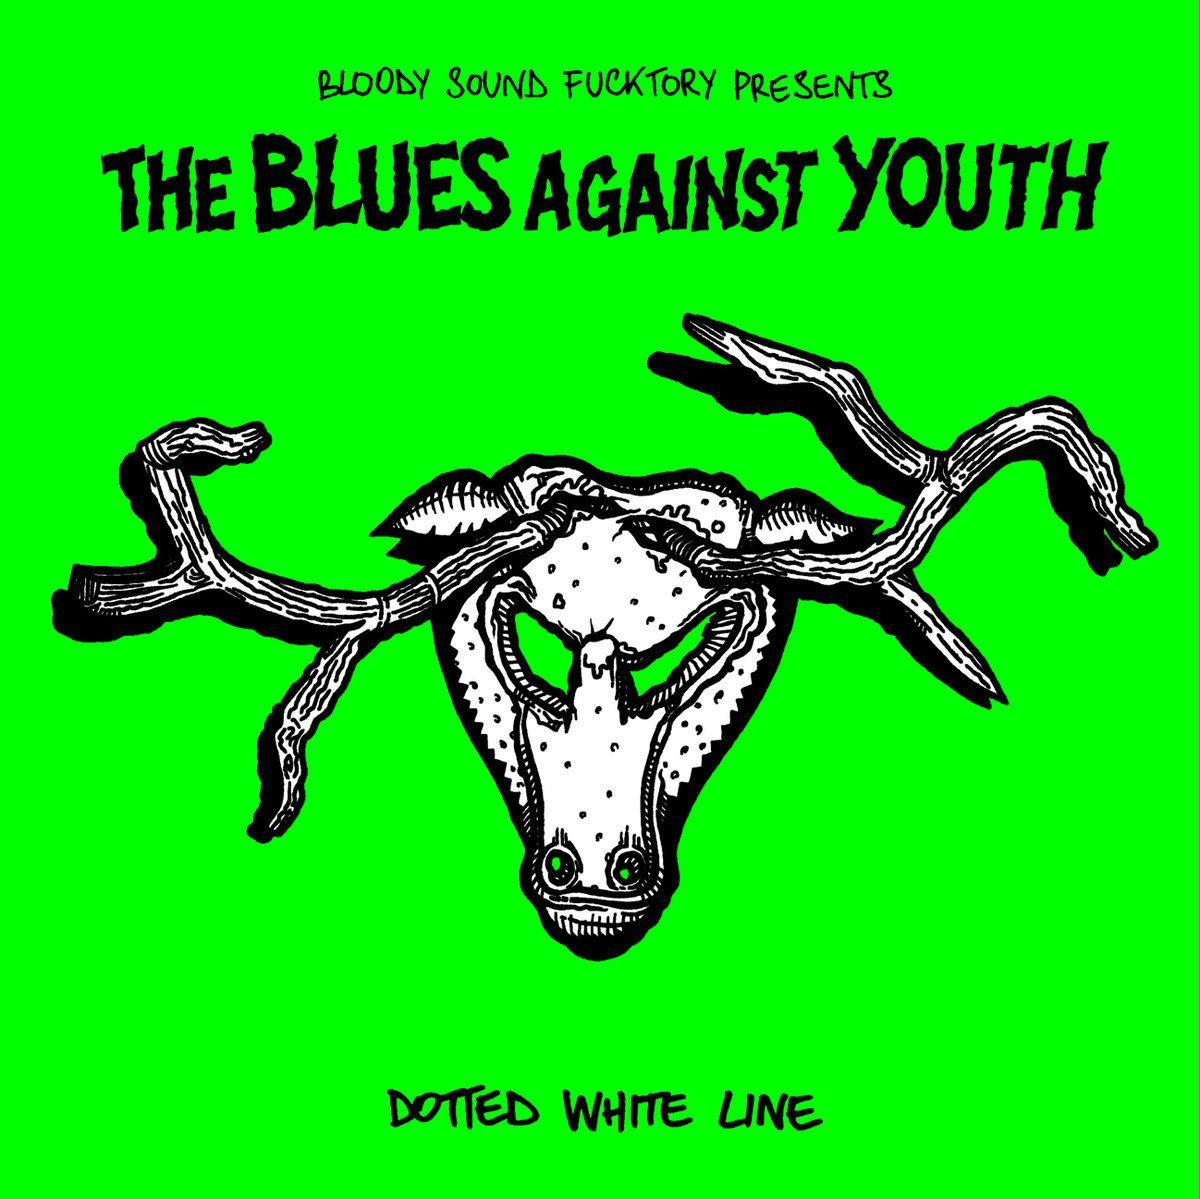 Blues with White Line Logo - Dotted White Line split with The Cyborgs. The Blues Against Youth